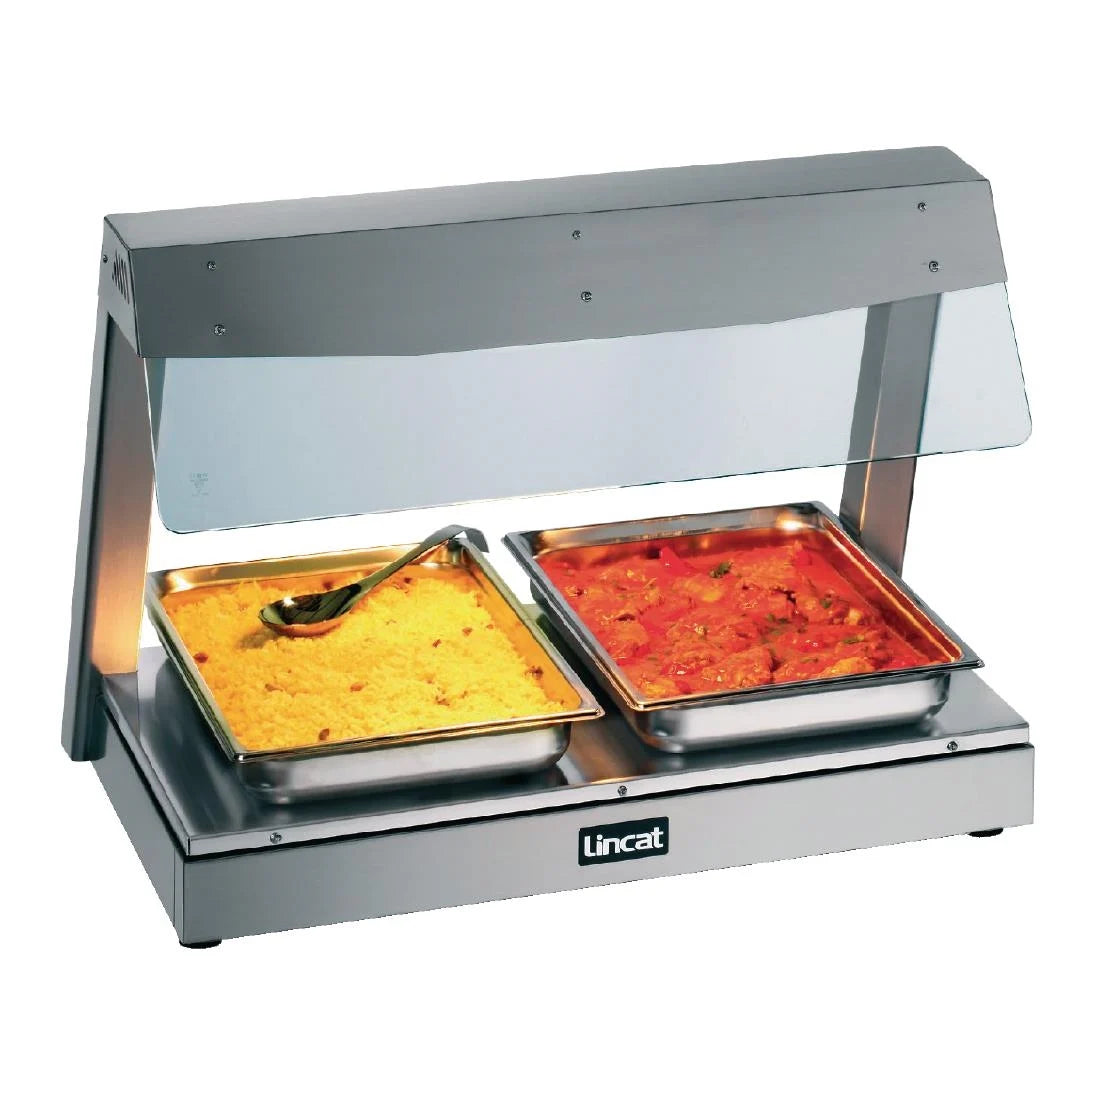 Lincat Seal Electric Food Warmer with Gantry LD2.Product Ref:00716.Model: J945.🚚 4-6 Weeks Delivery